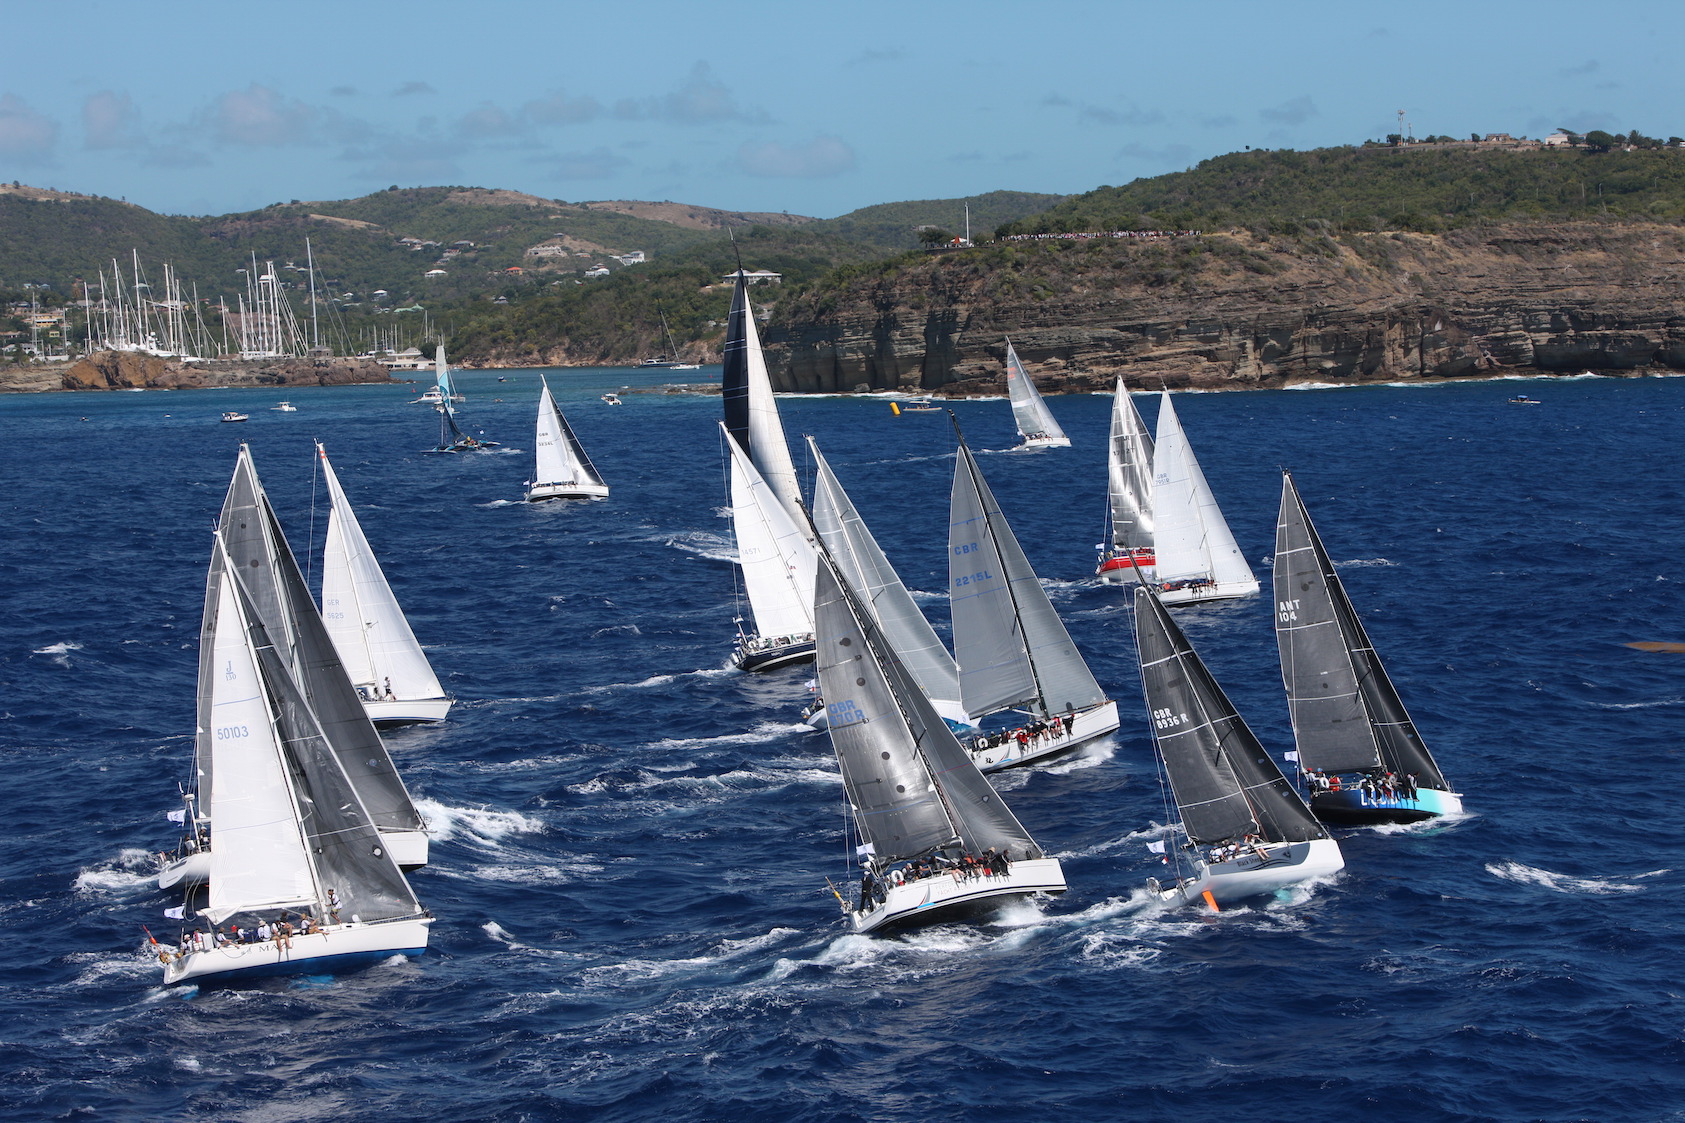 Competitors will have to wait until 21 February 2022 to take part in the Caribbean's only offshore race - the RORC Caribbean 600 - after the RORC announced the cancellation of the 13th edition due to the pandemic © Tim Wright/Photoaction.com